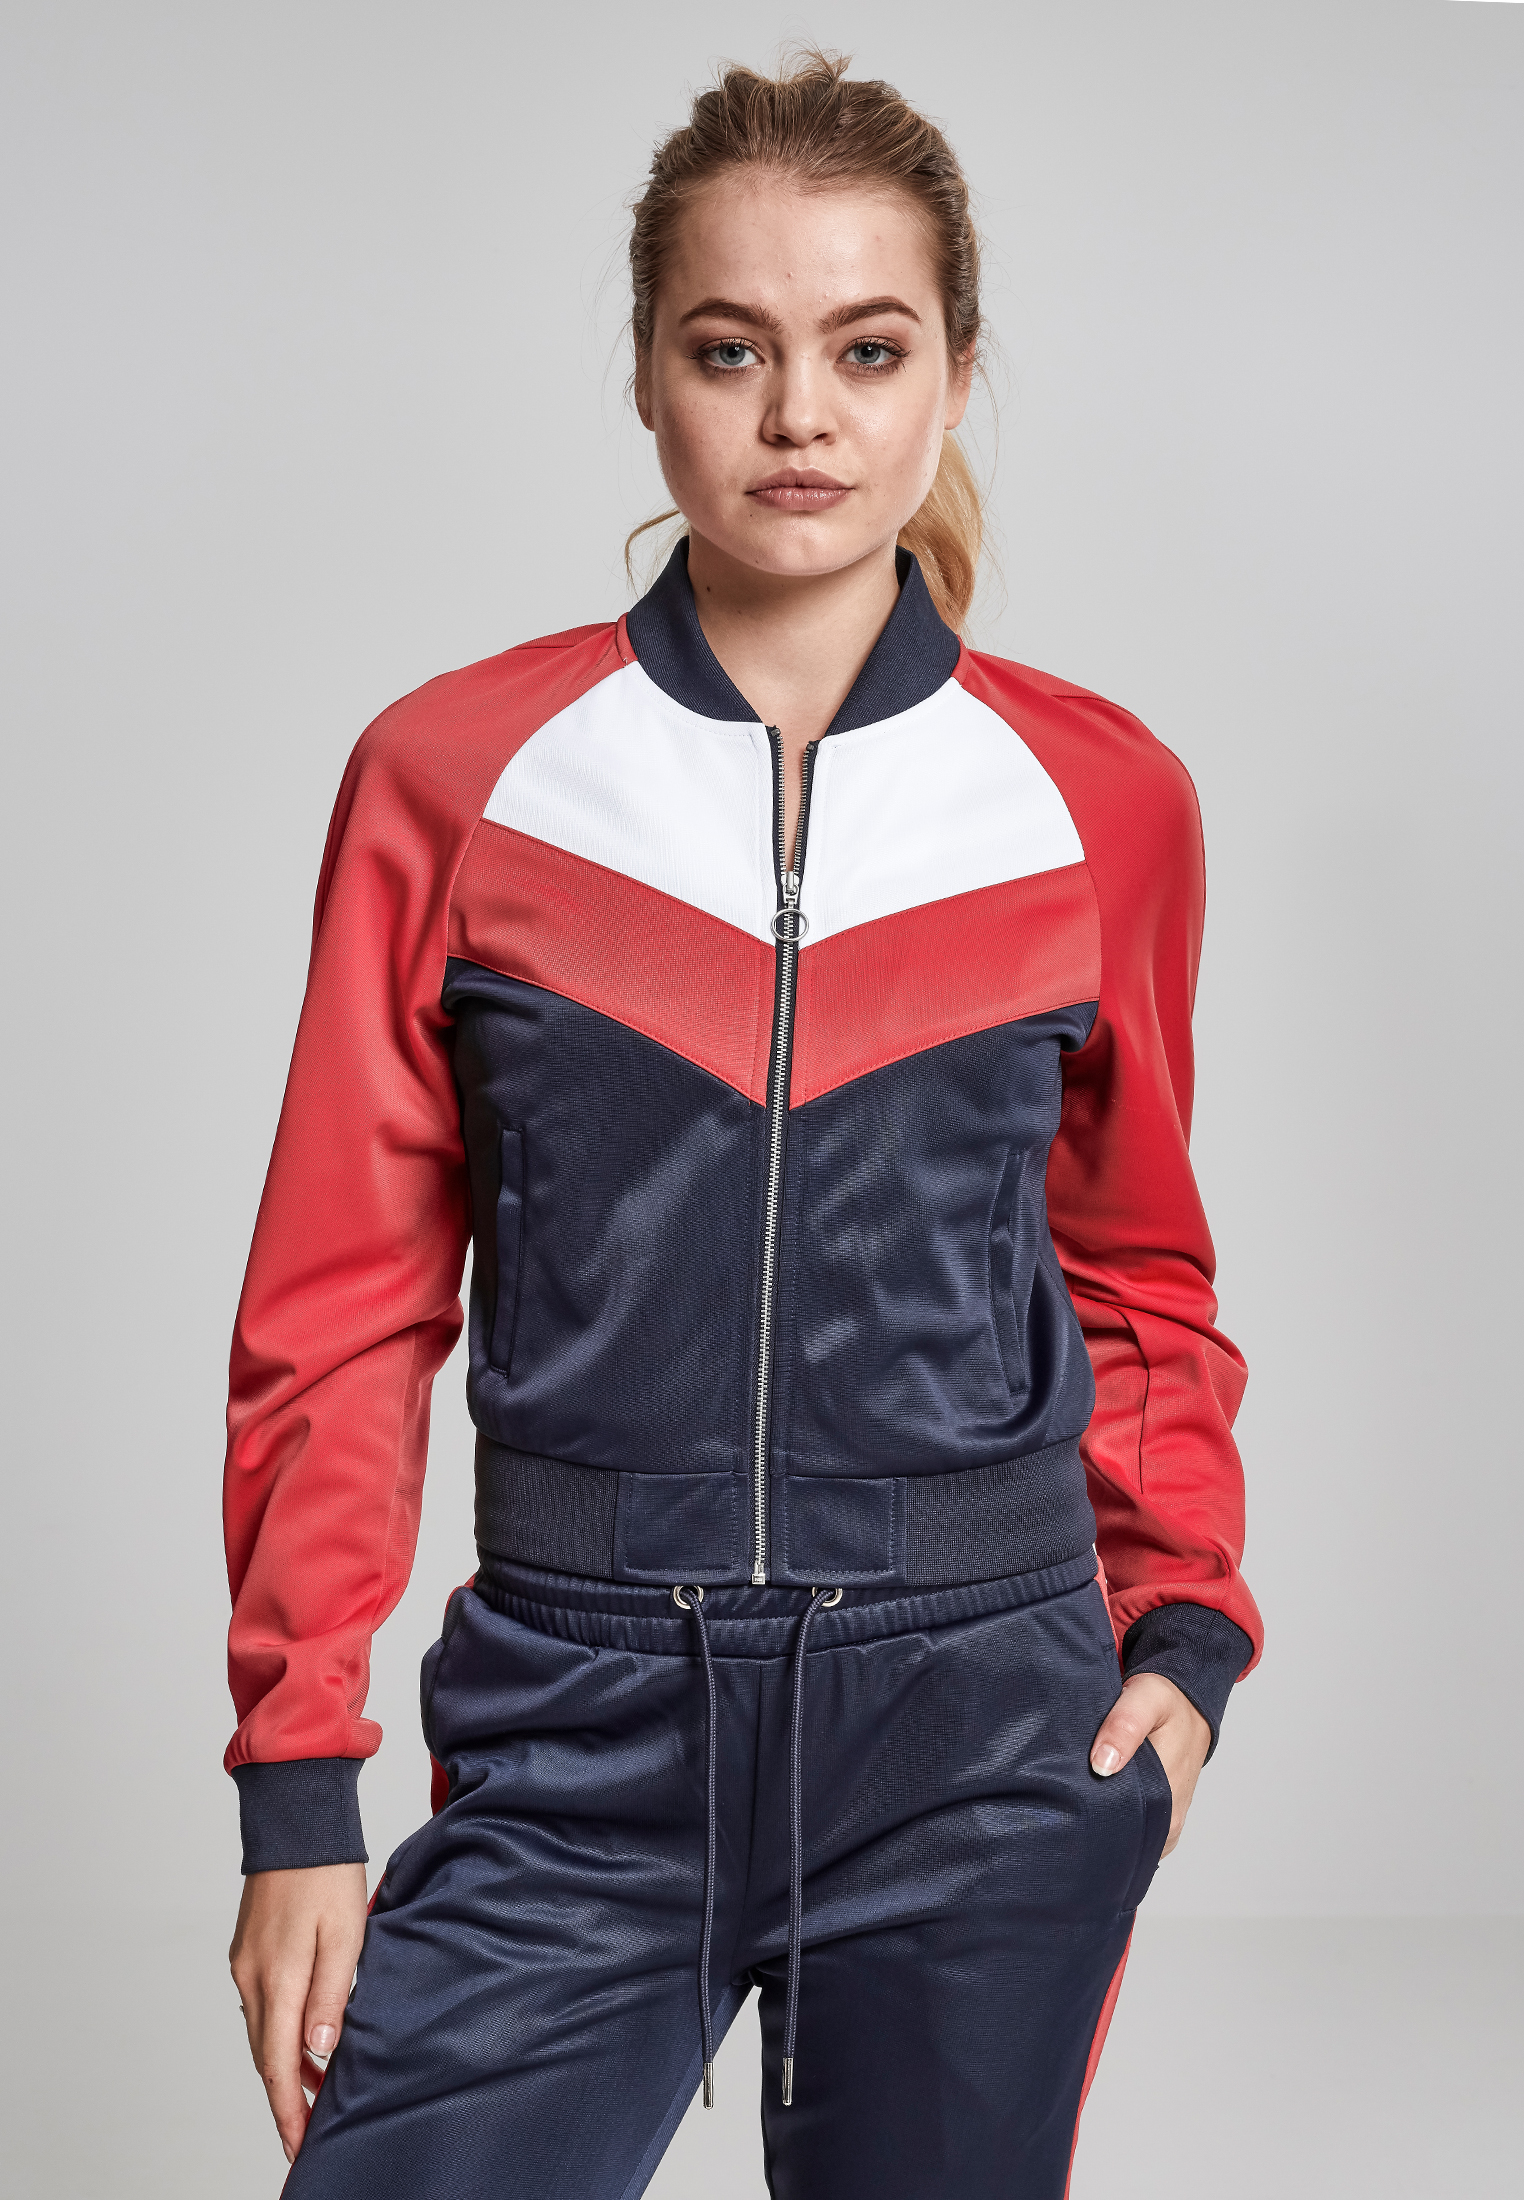 Light Jackets Ladies Short Raglan Track Jacket in Farbe navy/fire red/white